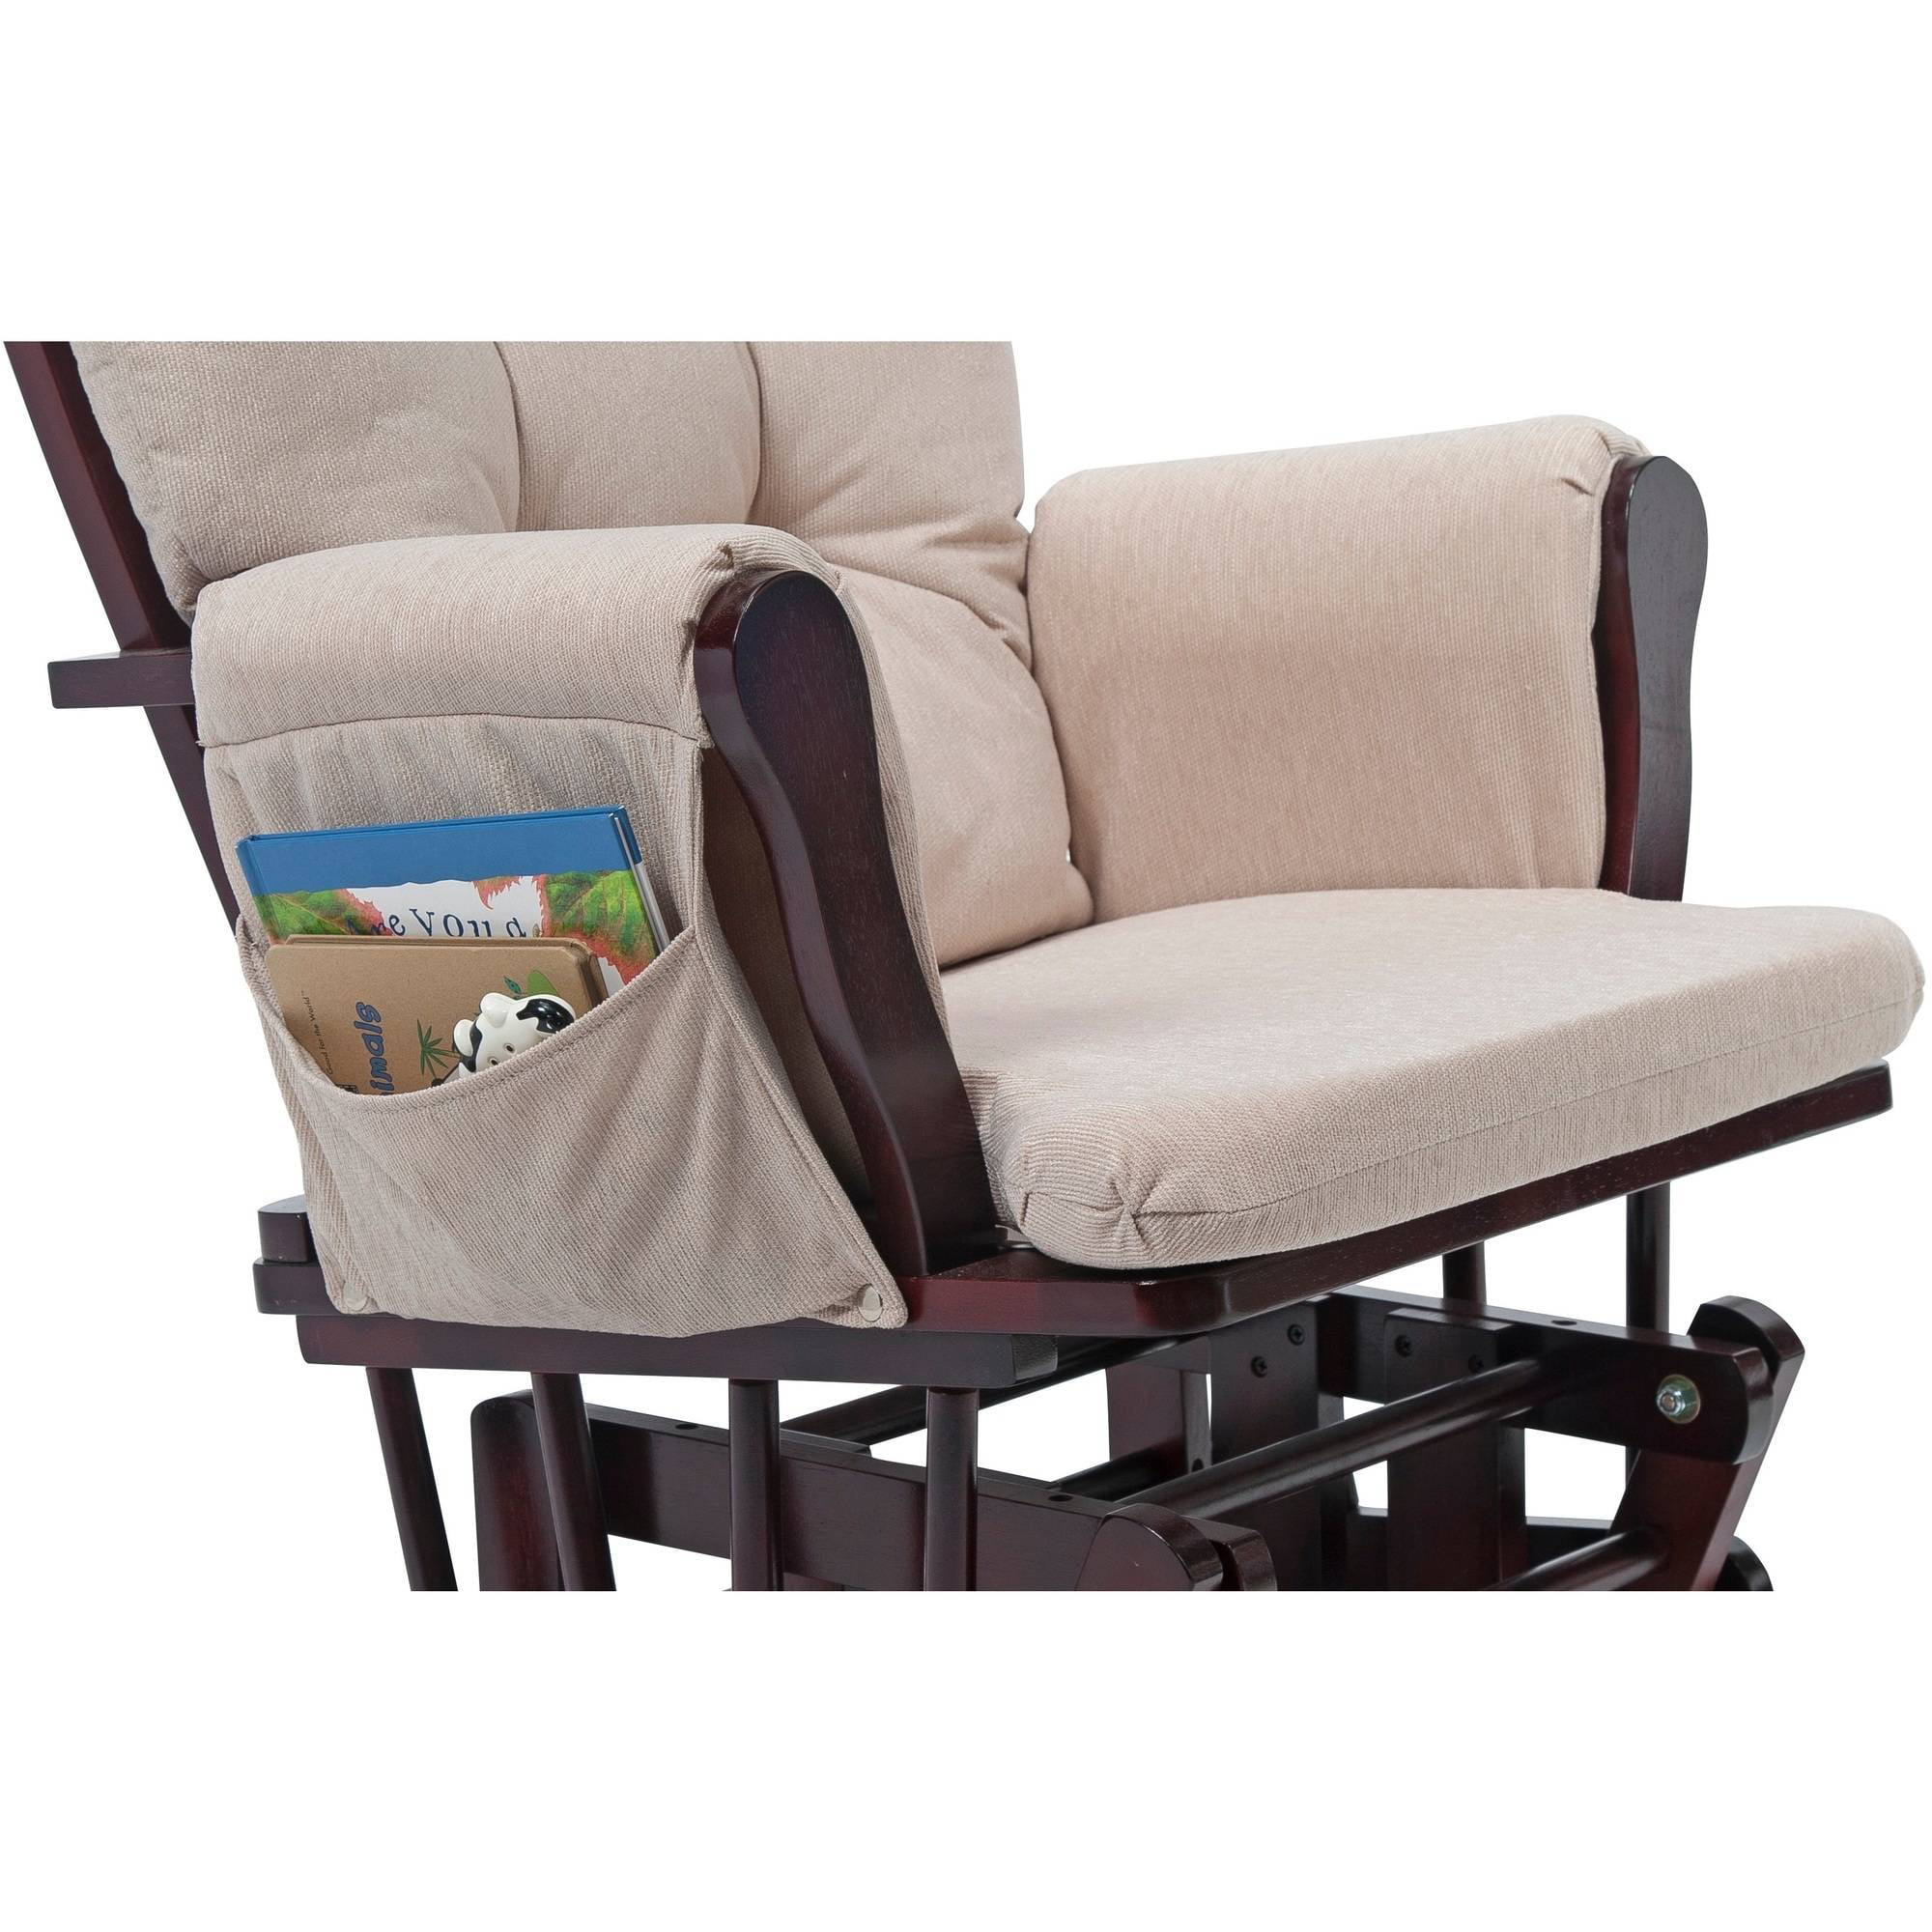  Rocking Chair Nursery Cushions for Large Space